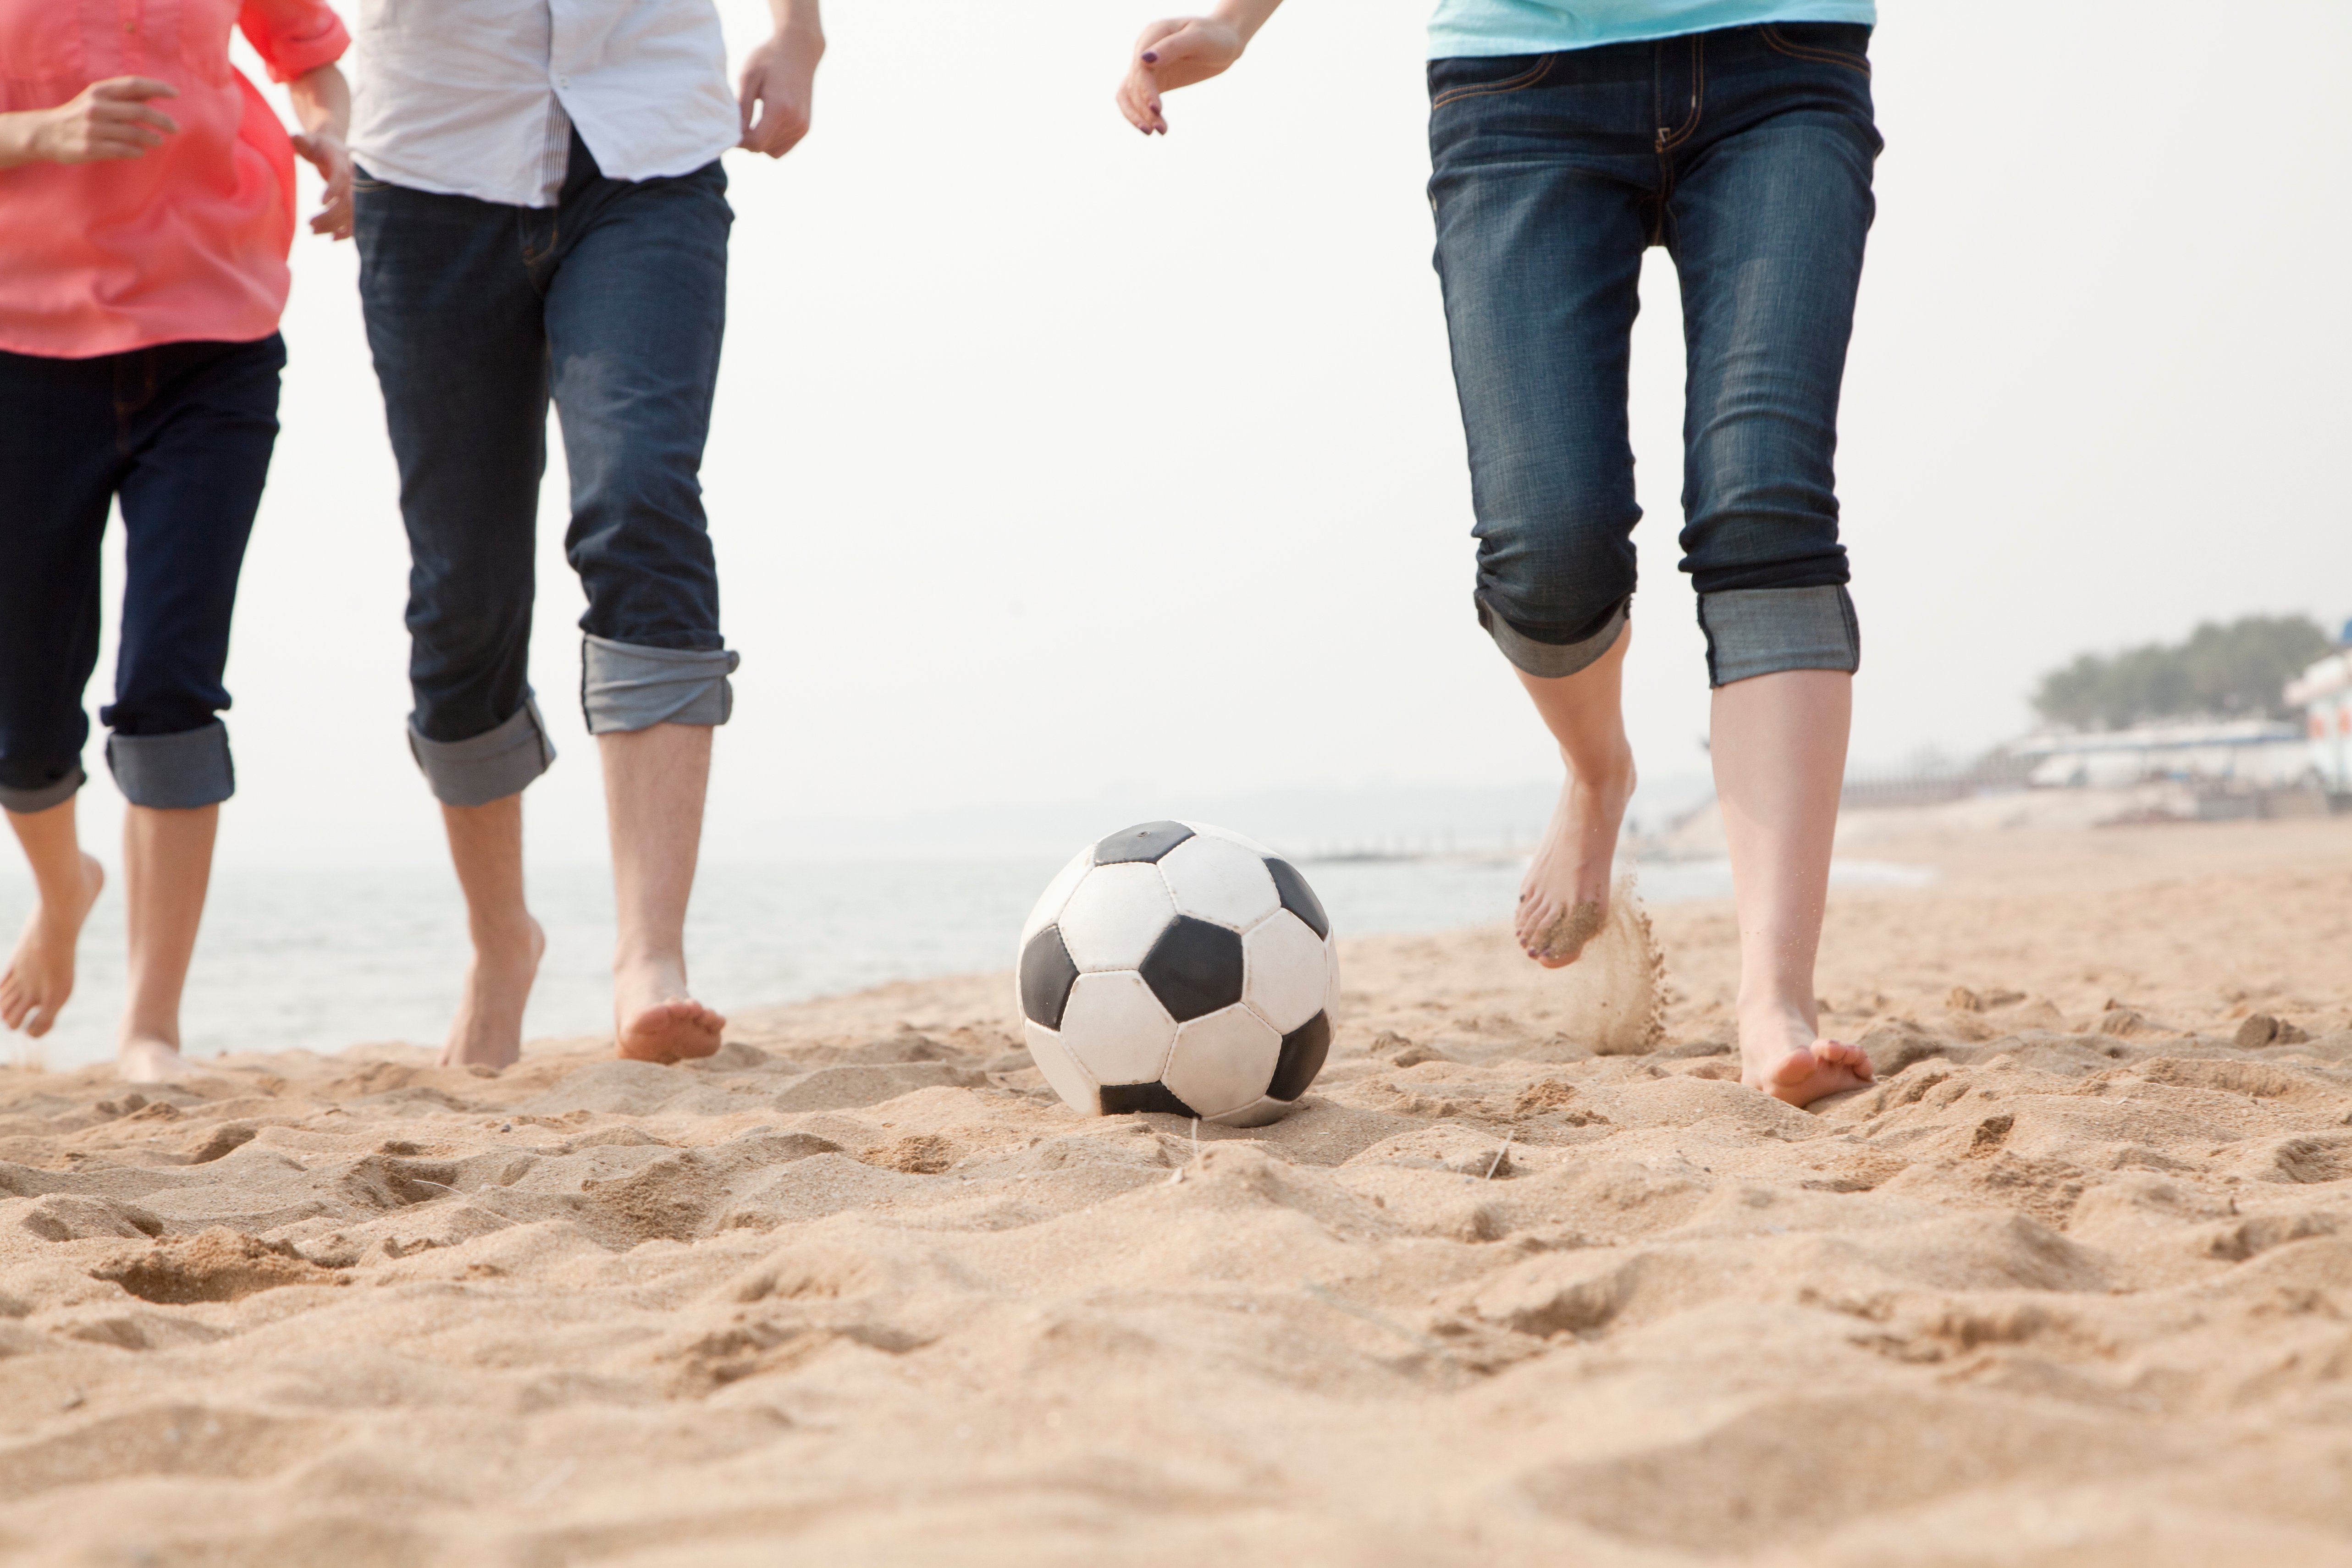 young-friends-playing-soccer-on-the-beach-2021-08-26-15-29-12-utc